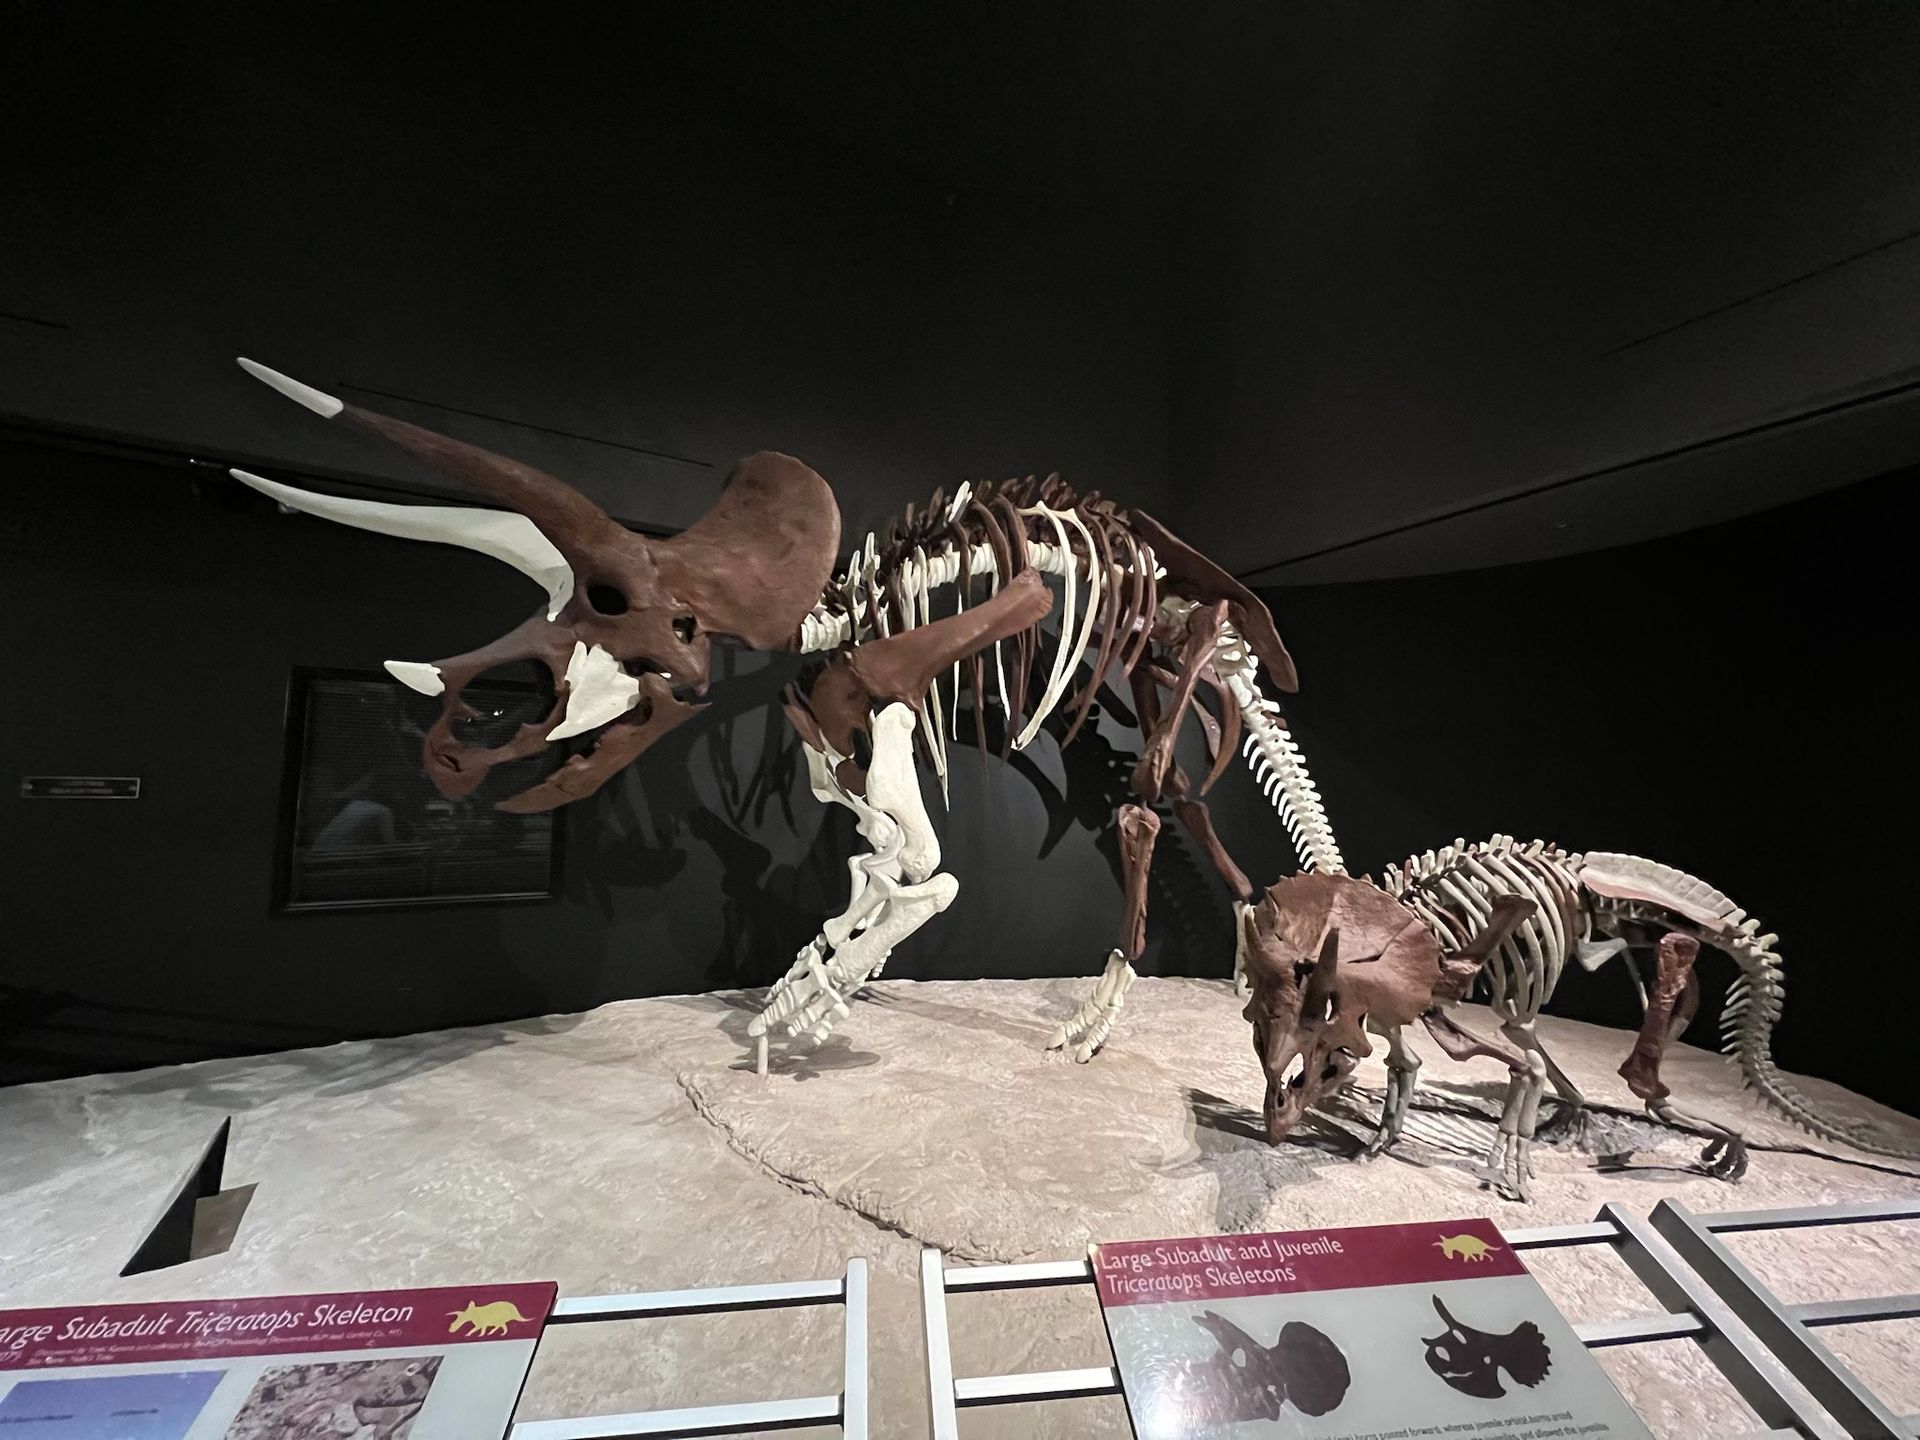 A triceratops skeleton is on display in a museum